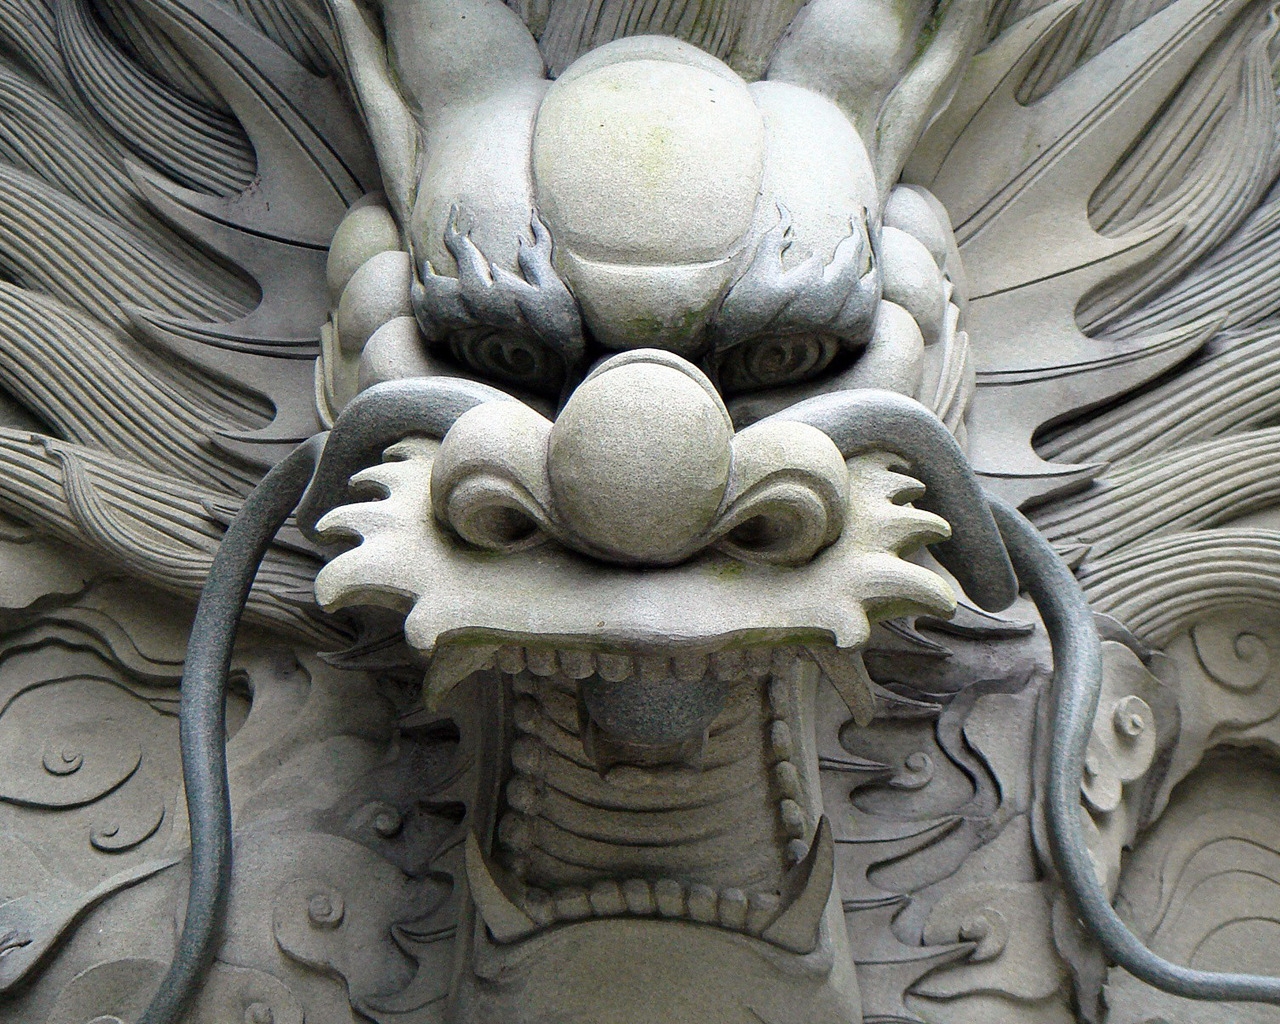 Chinese Dragon Statue for 1280 x 1024 resolution